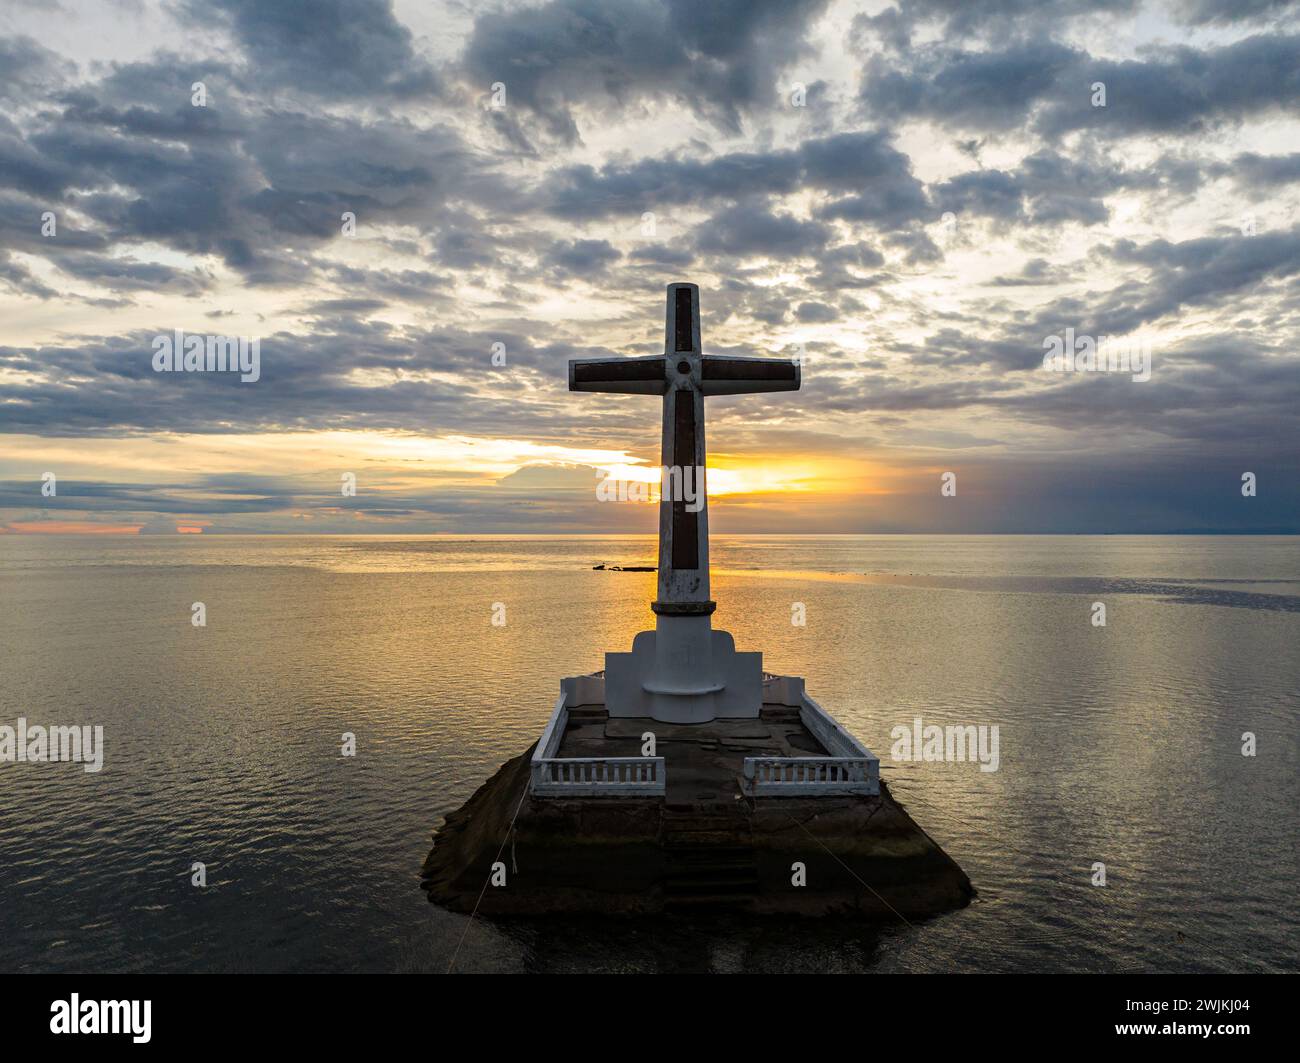 Sunken Cemetery in Camiguin Island. Sunset and clouds backgroud. Philippines. Stock Photo